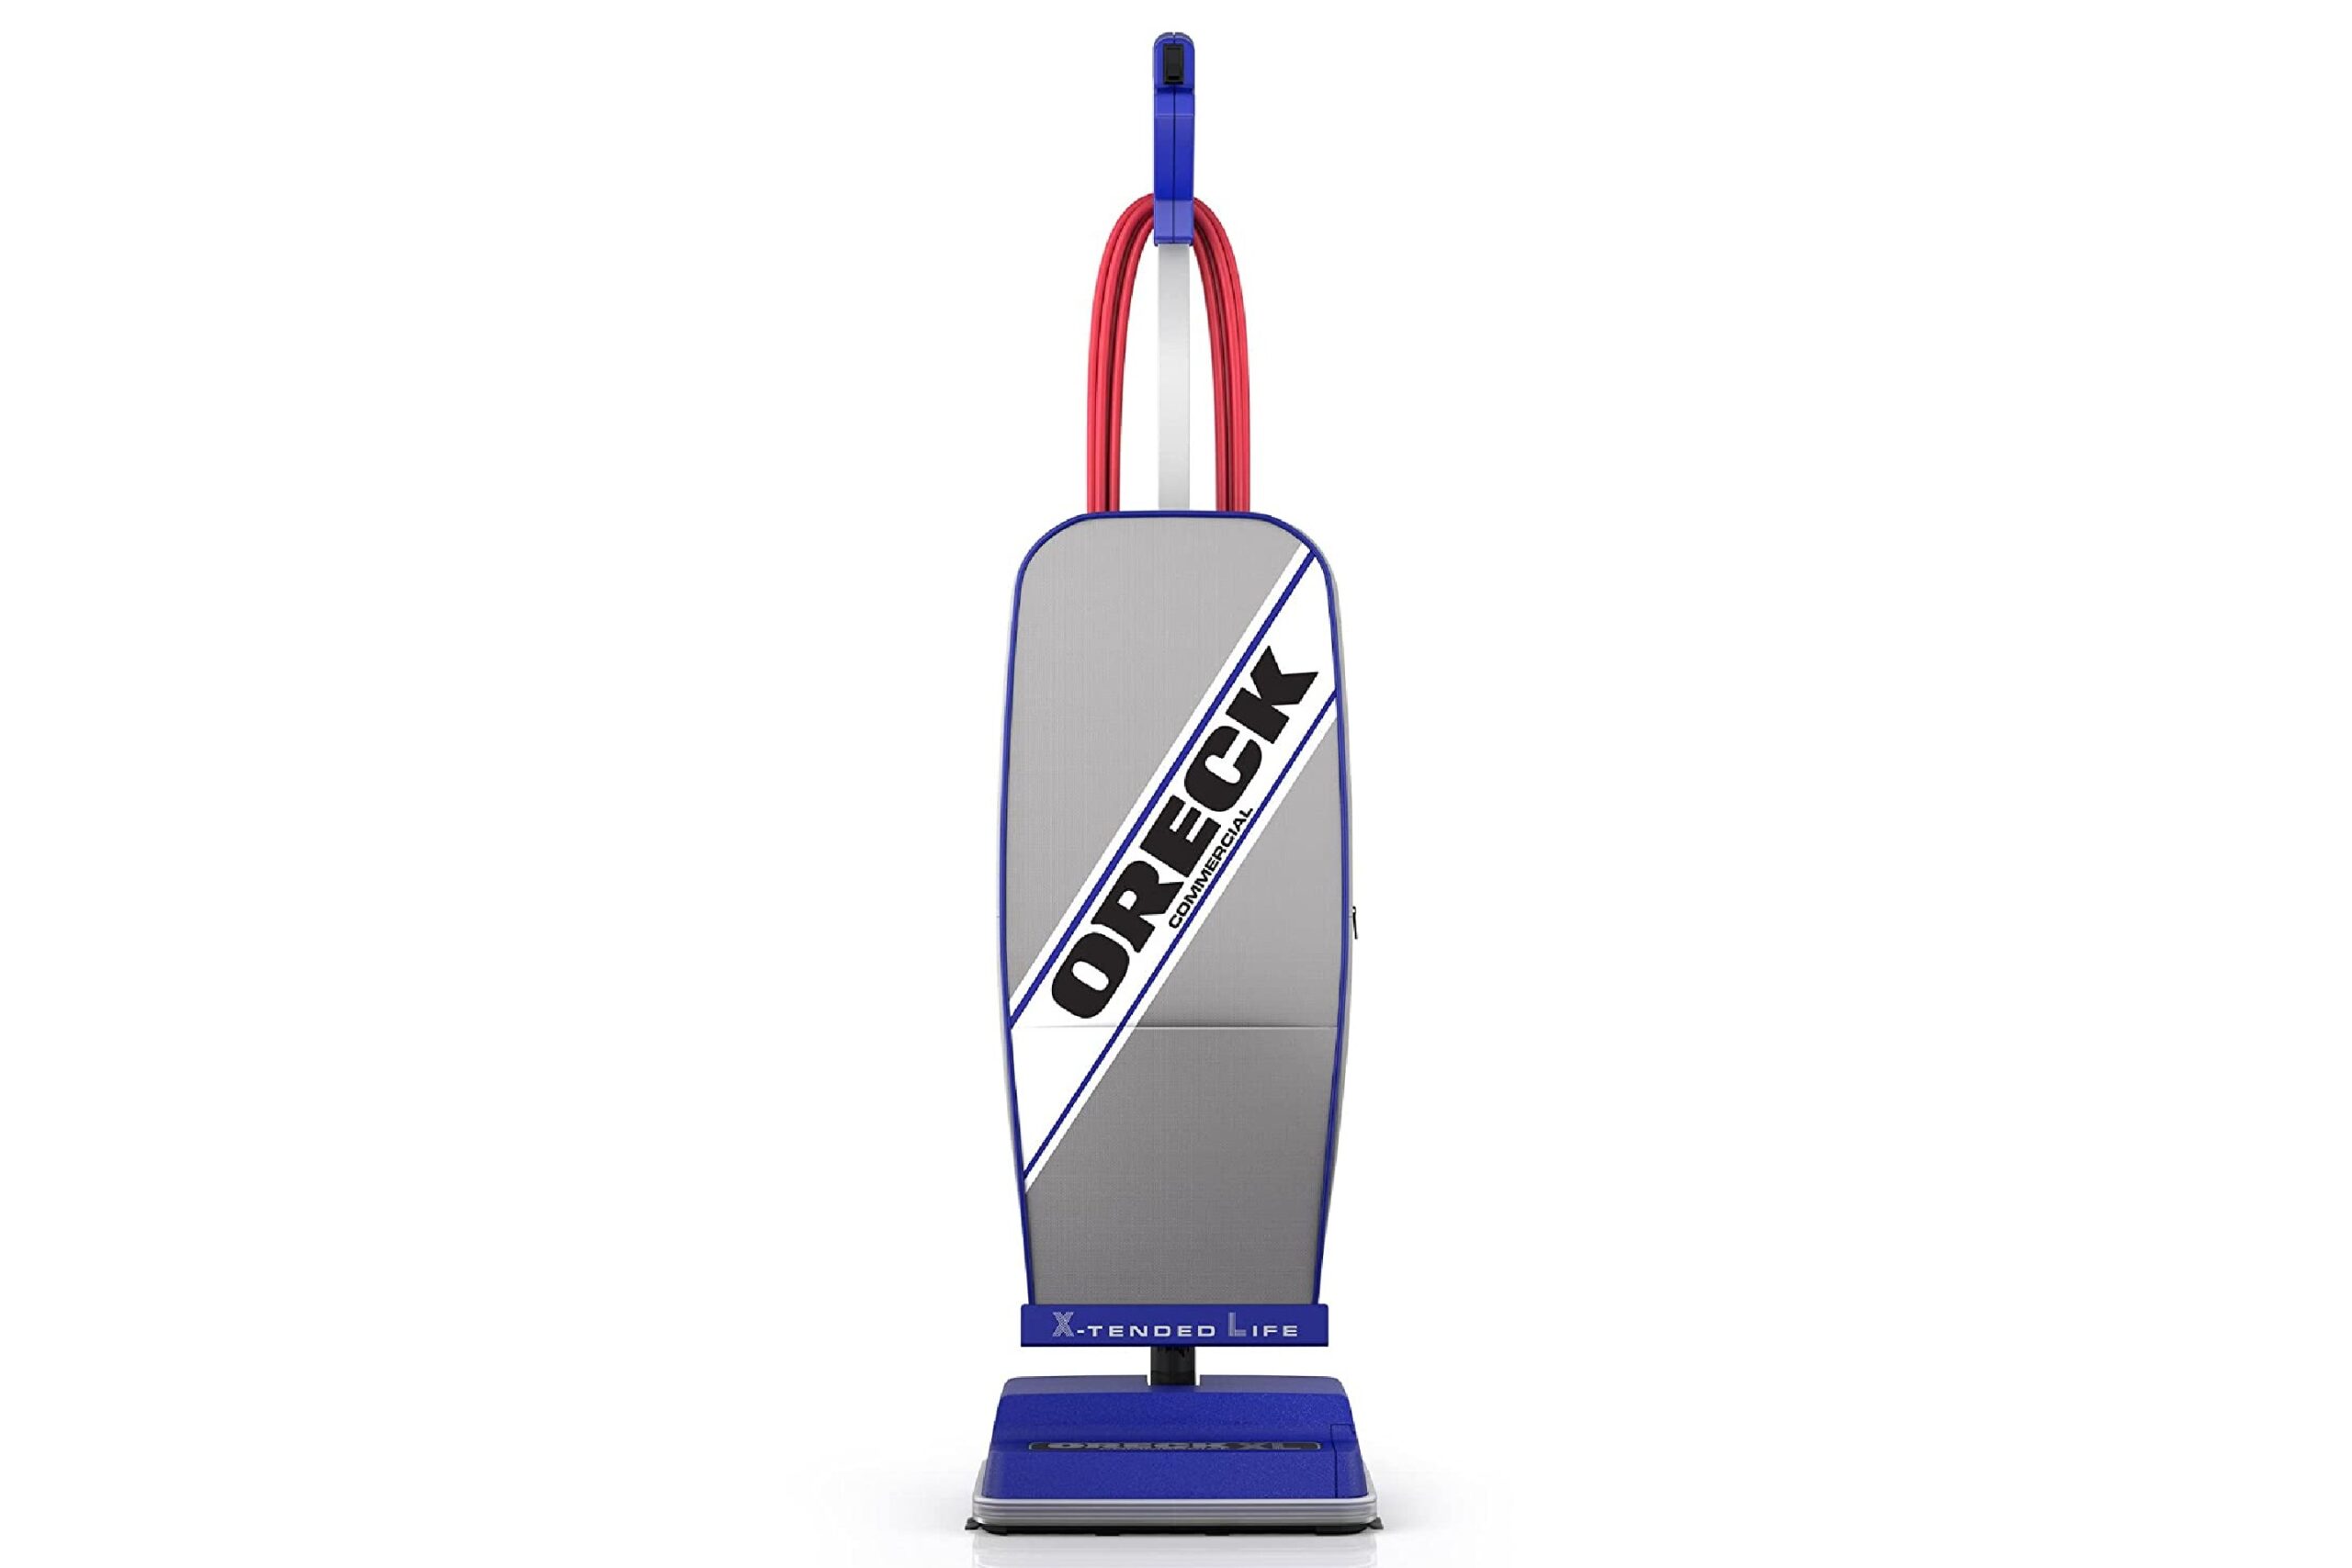 Oreck XL2100RHS Commercial Vacuum Cleaner